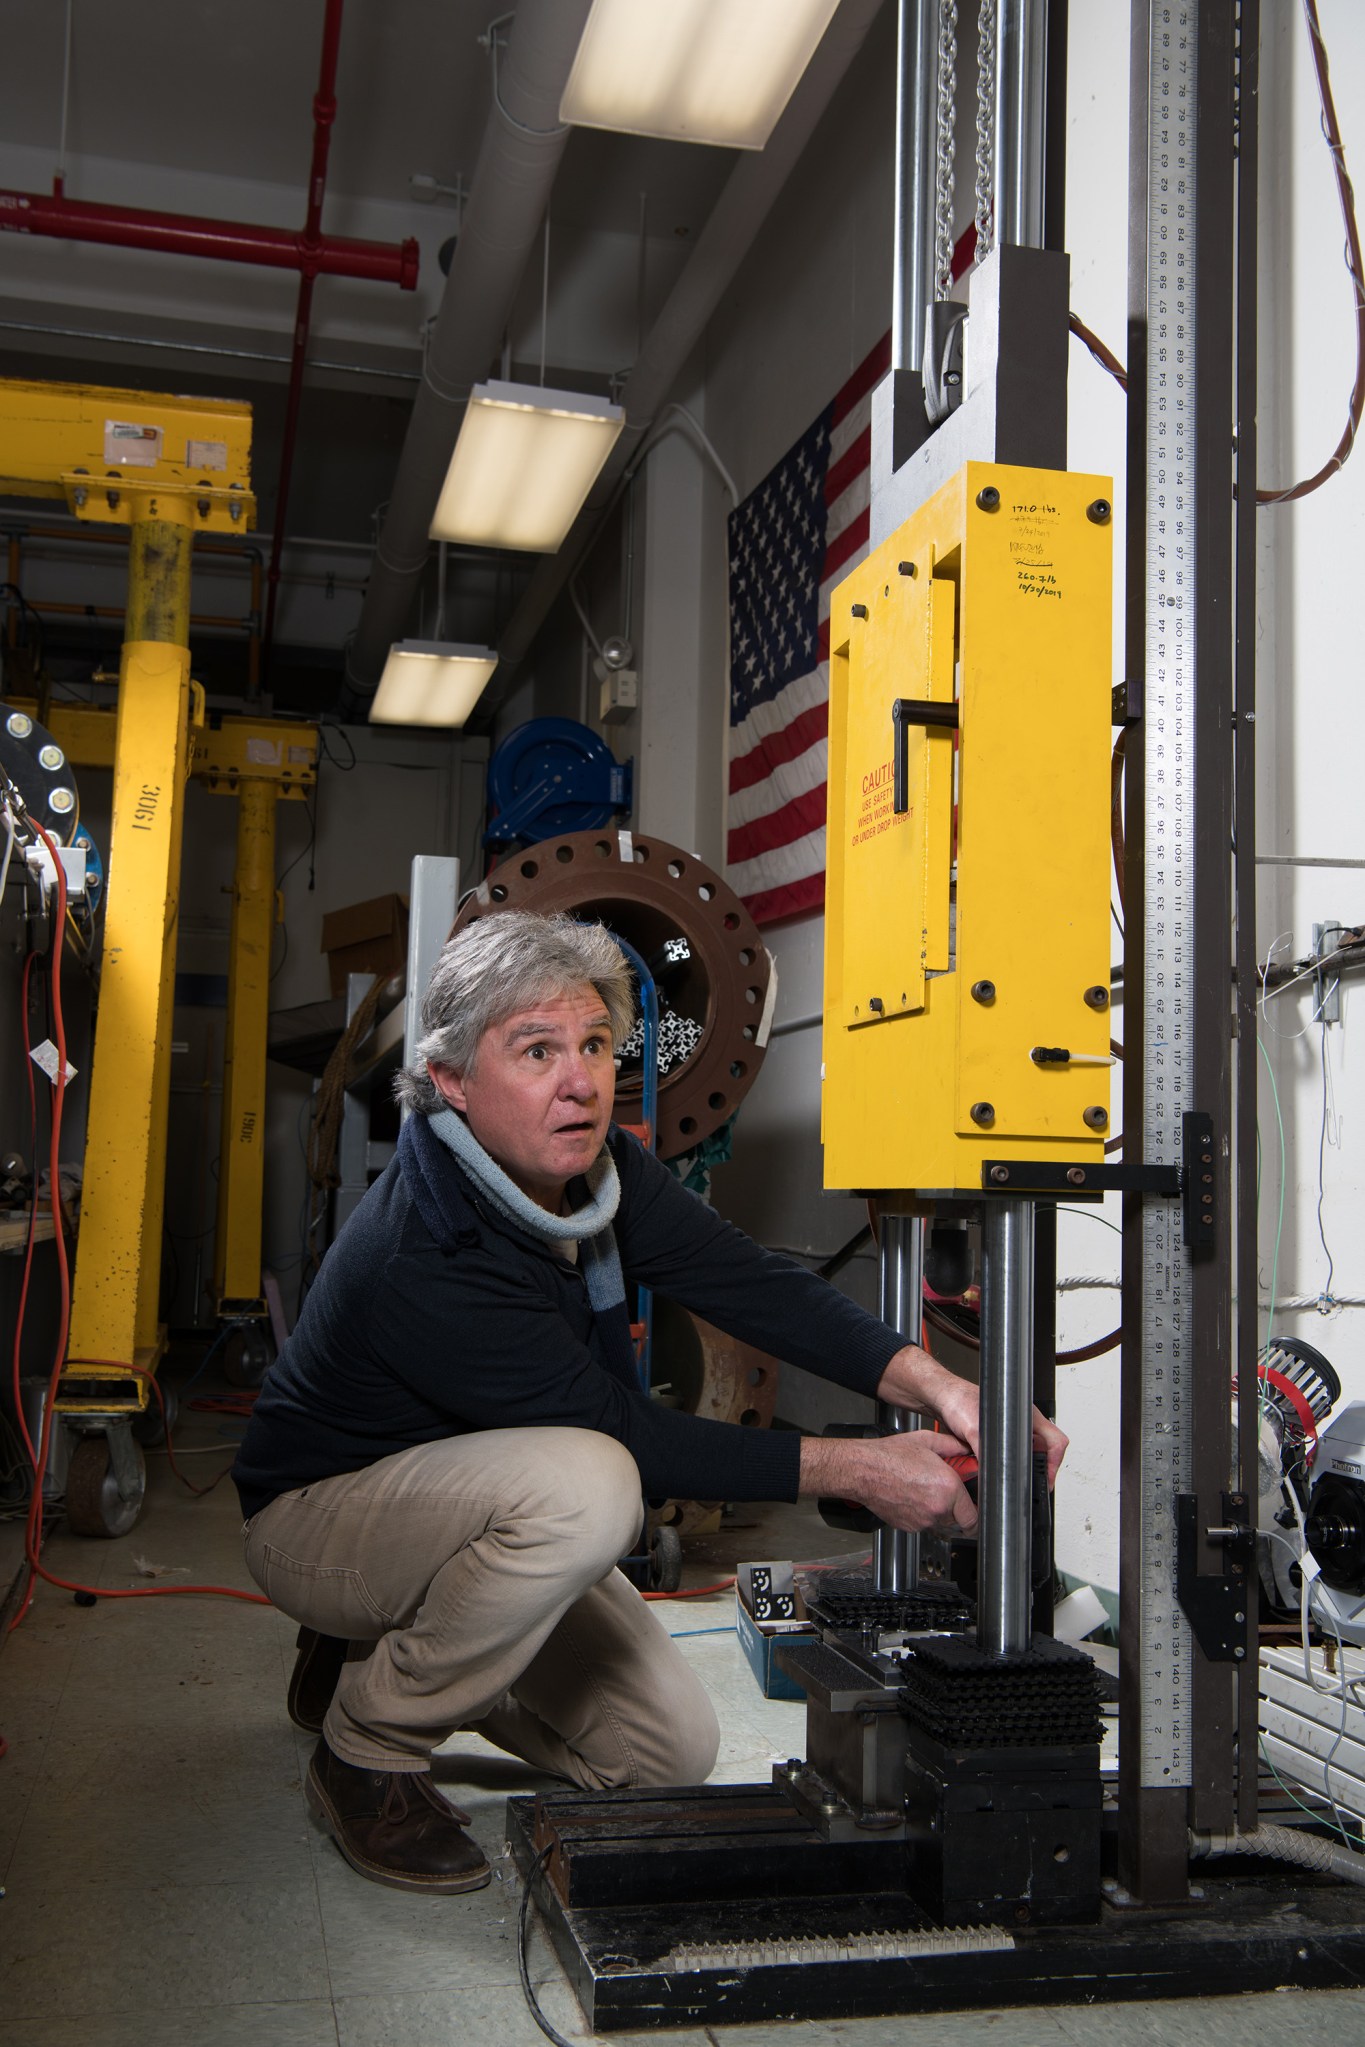 An engineer kneels before a tall yellow and silver crane device and adjusts its settings.